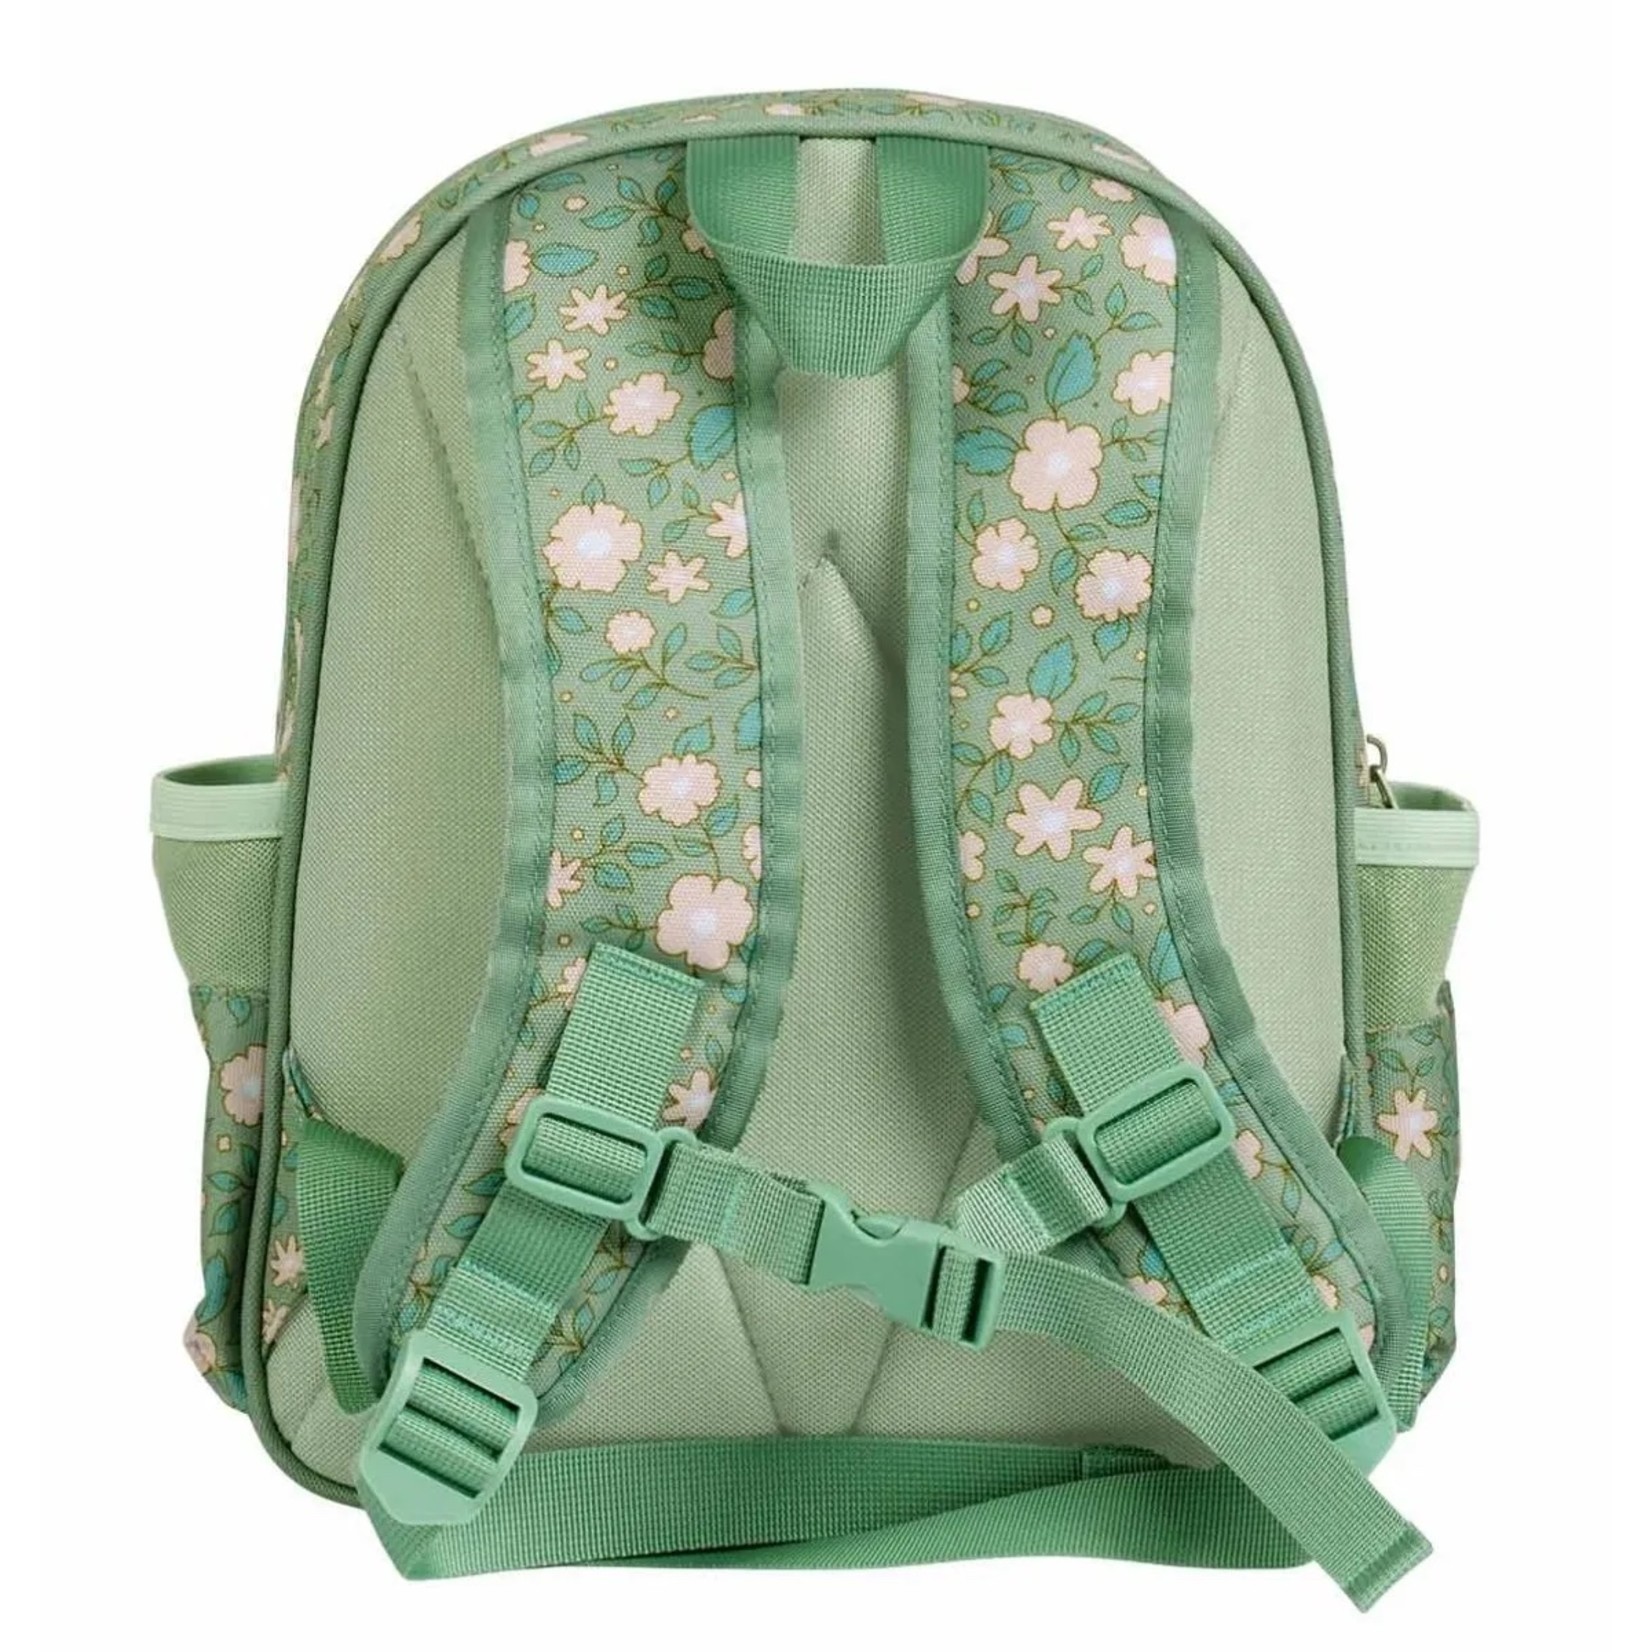 A LITTLE LOVELY COMPANY KIDS BACKPACK INSULATED FRONT COMPARTMENT: BLOSSOMS SAGE